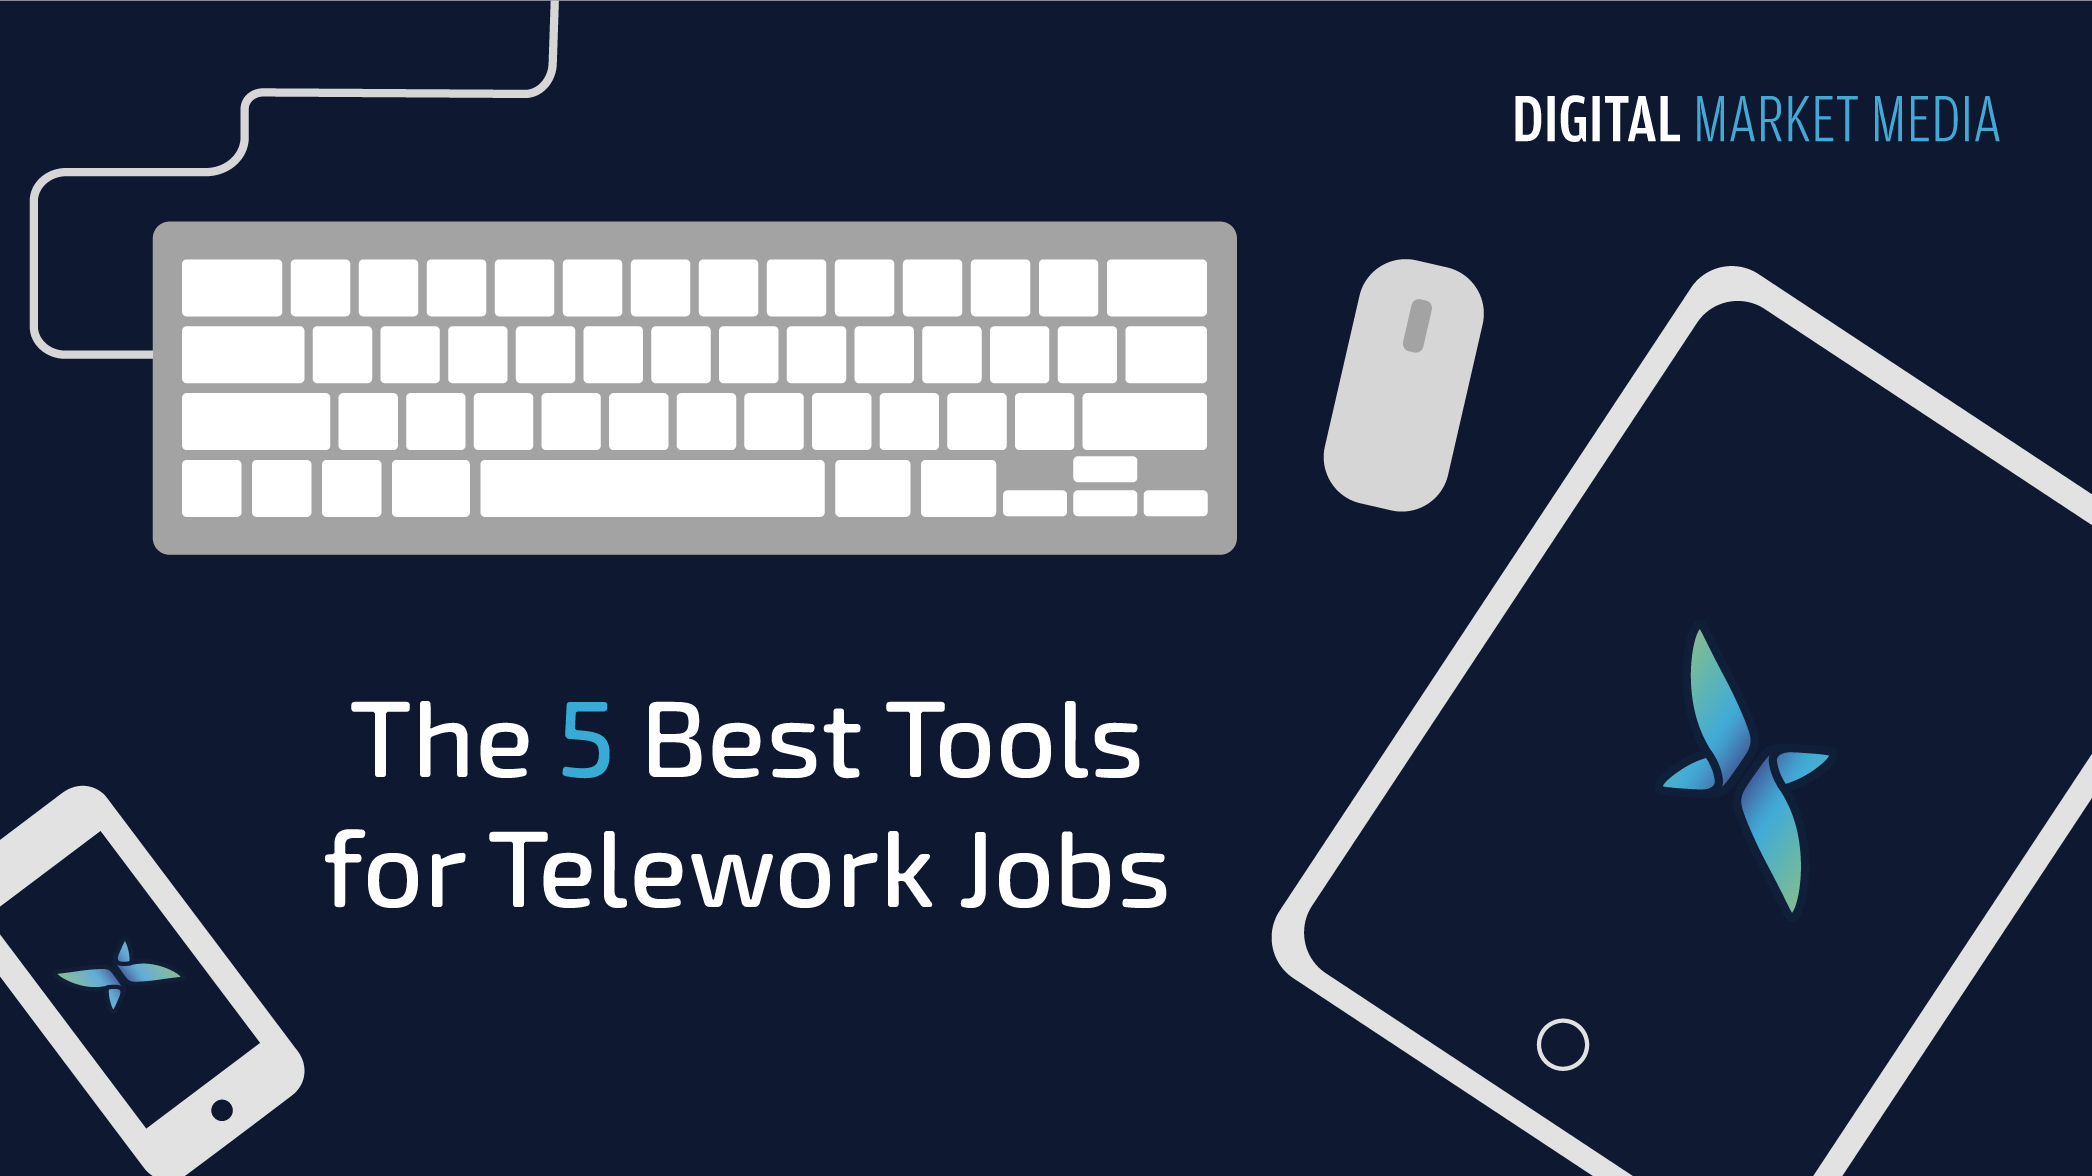 The 5 Best Tools for Telework Jobs